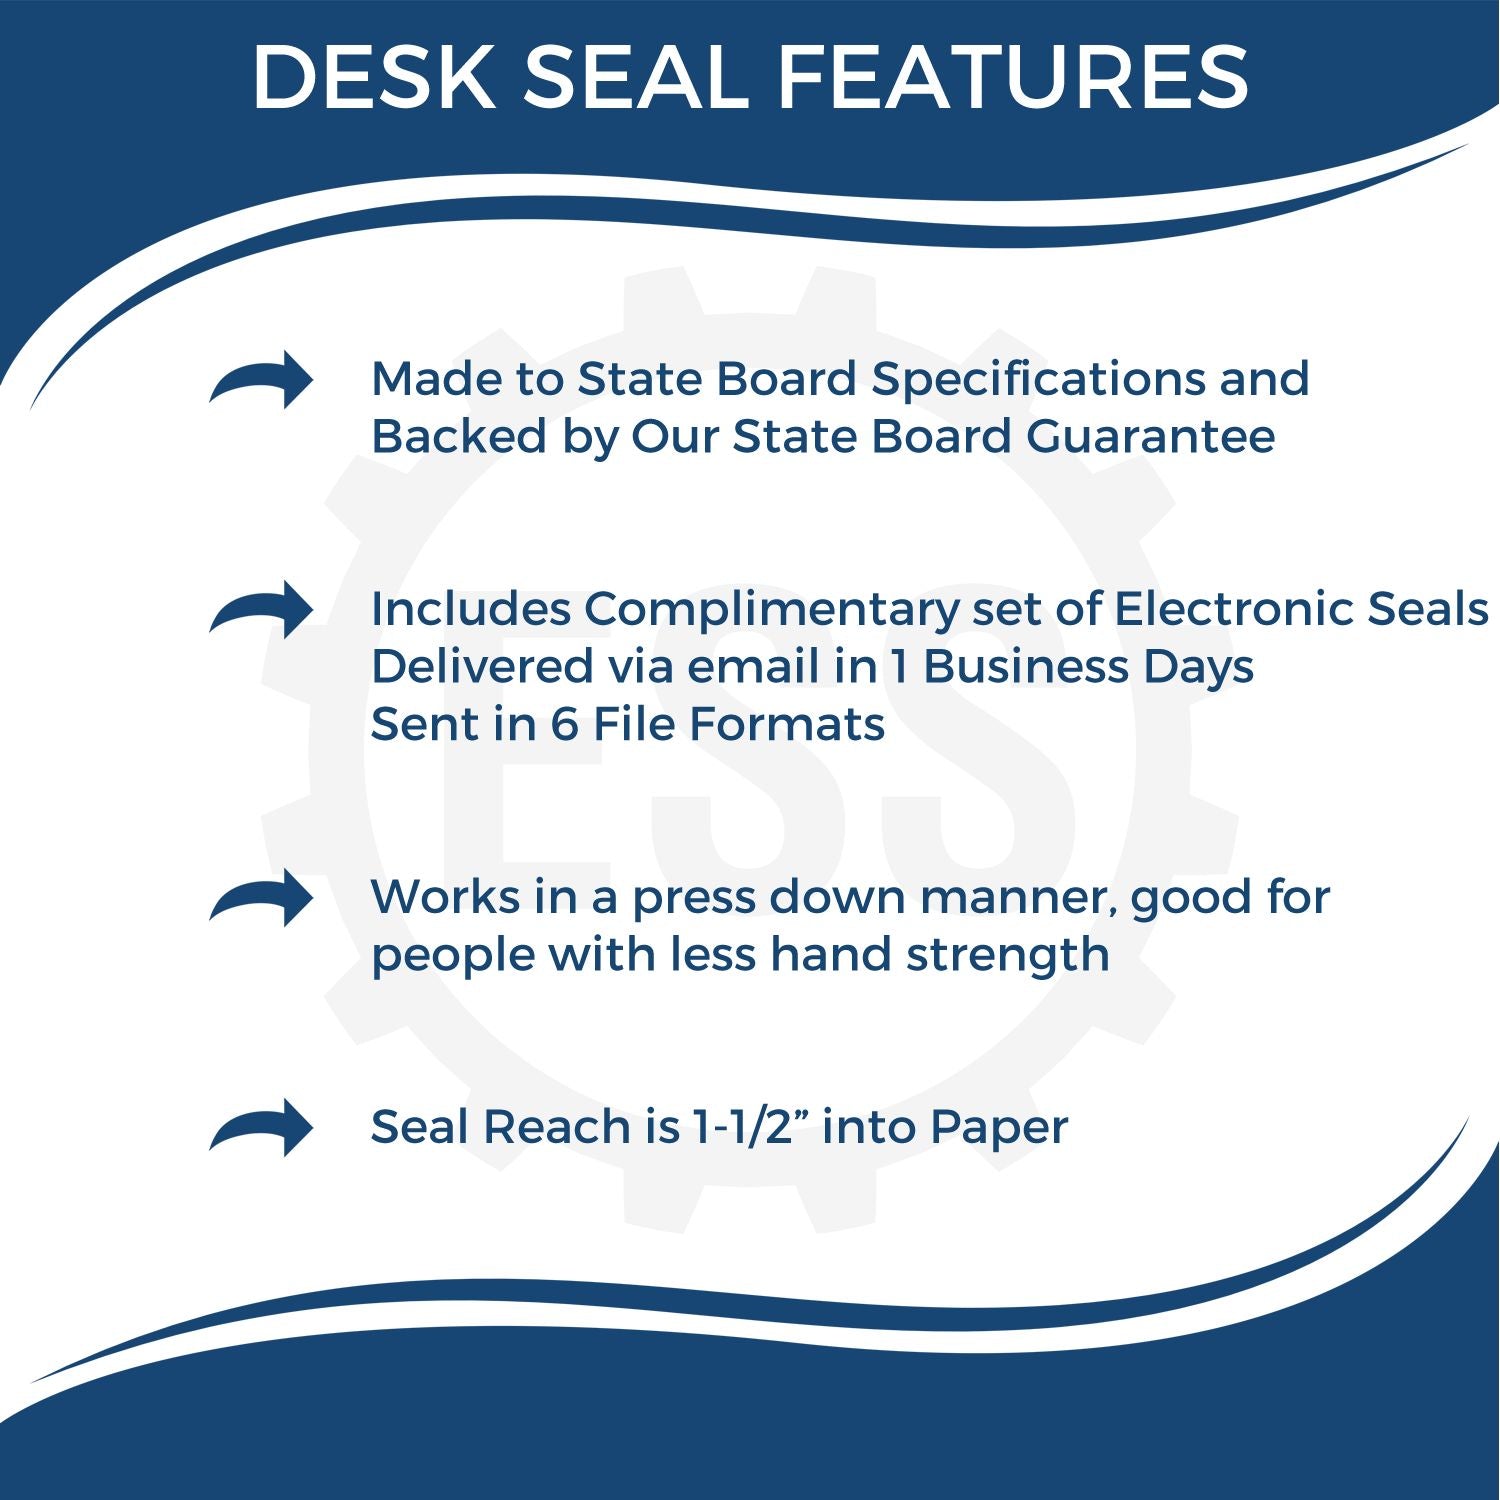 A picture of an infographic highlighting the selling points for the Puerto Rico Engineer Desk Seal